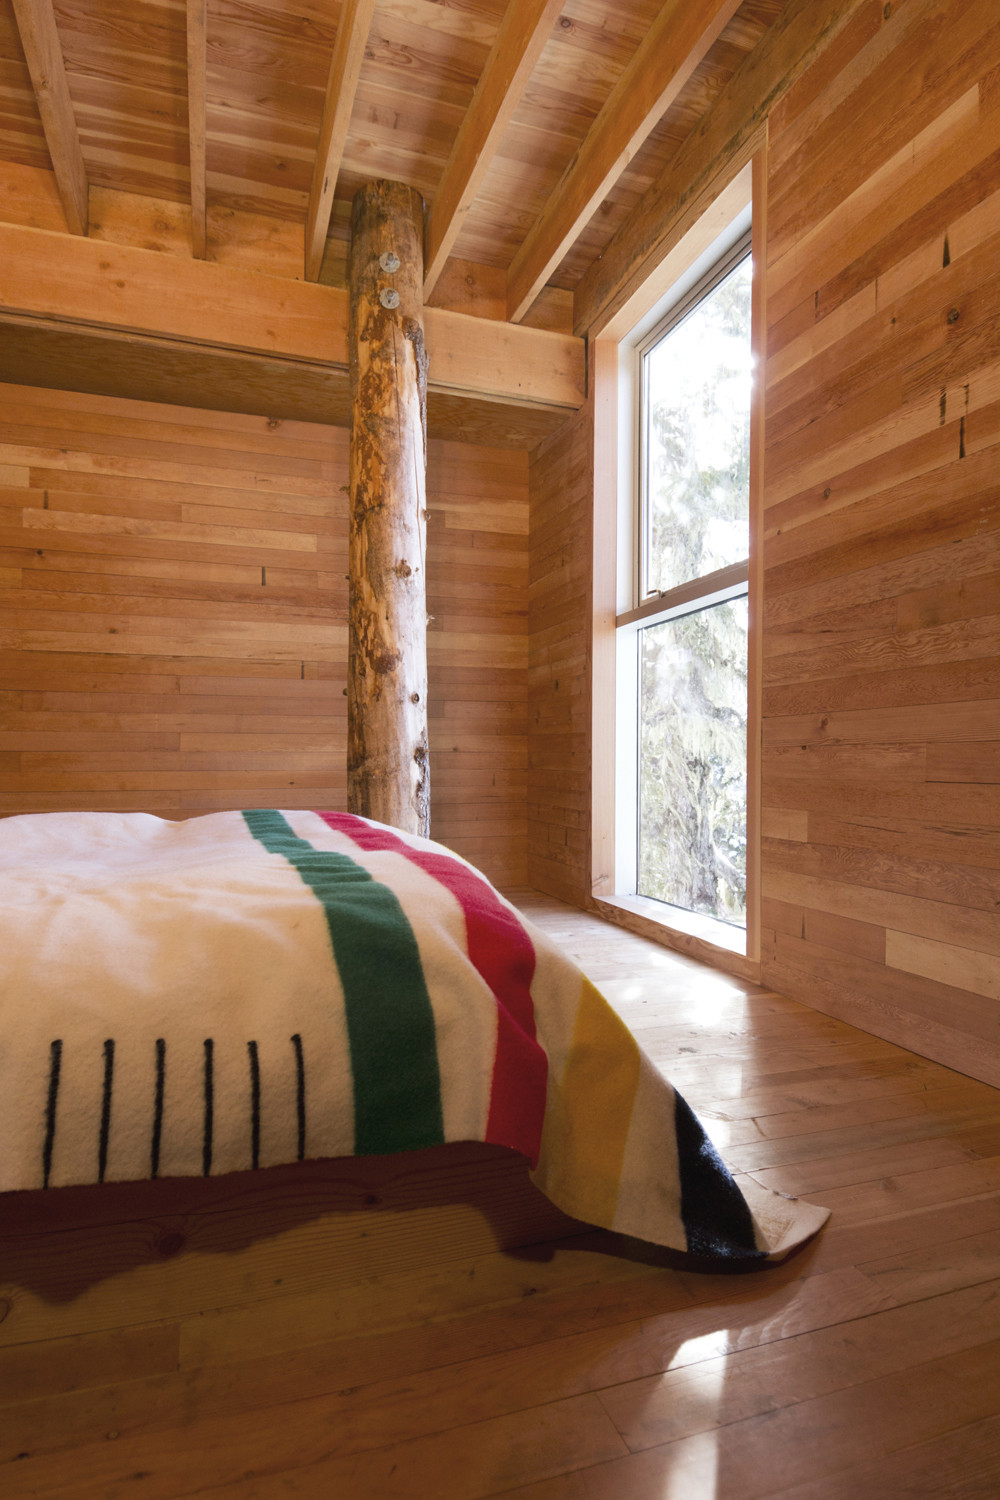 Bedroom of the cabin with a view of the snowy slopes above